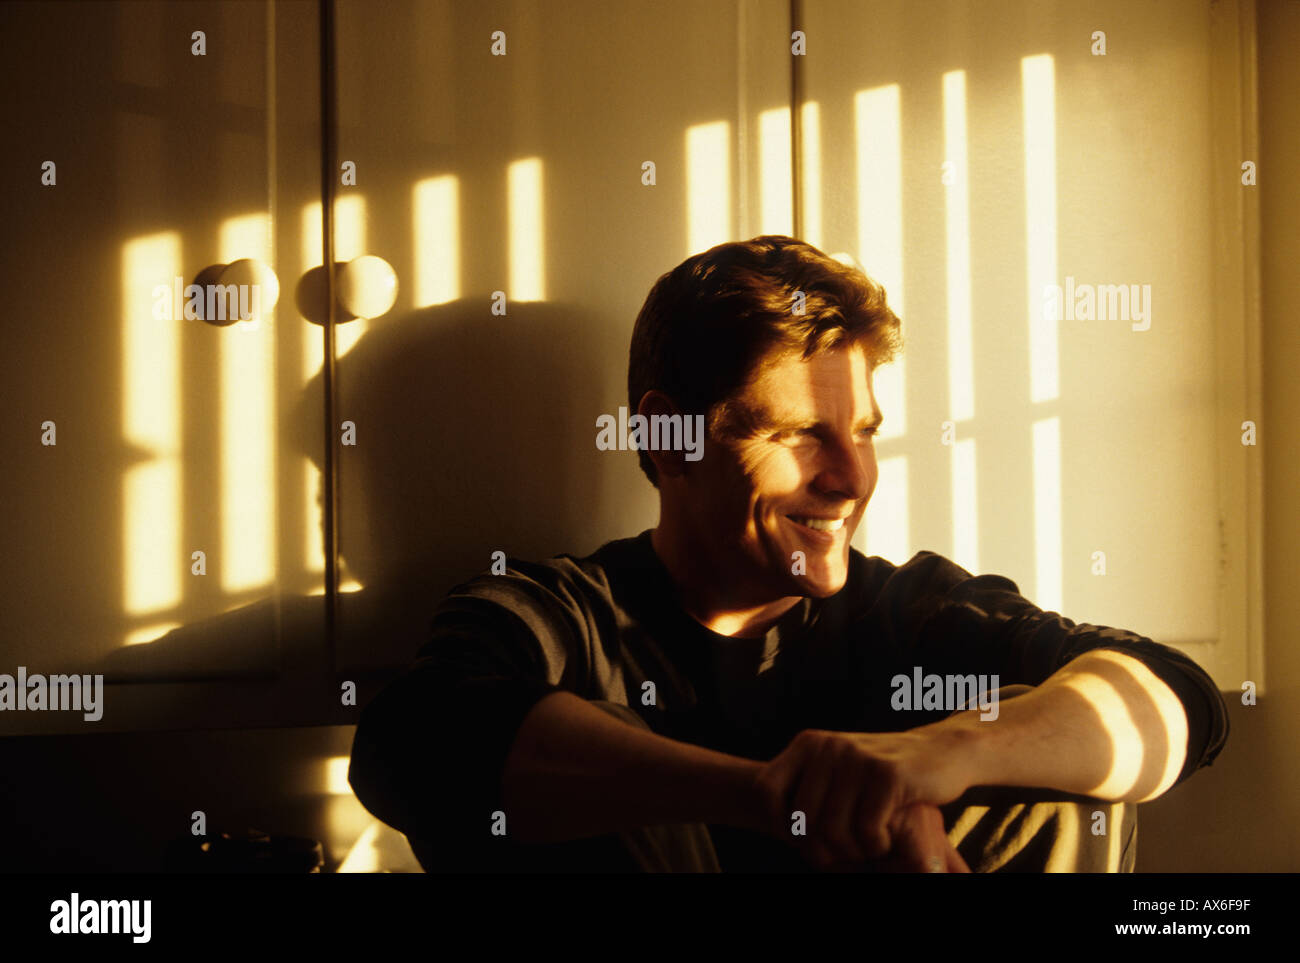 Man sitting on the floor in front of cabinets smiling with shadow from vertical blinds at sunset across his face Stock Photo